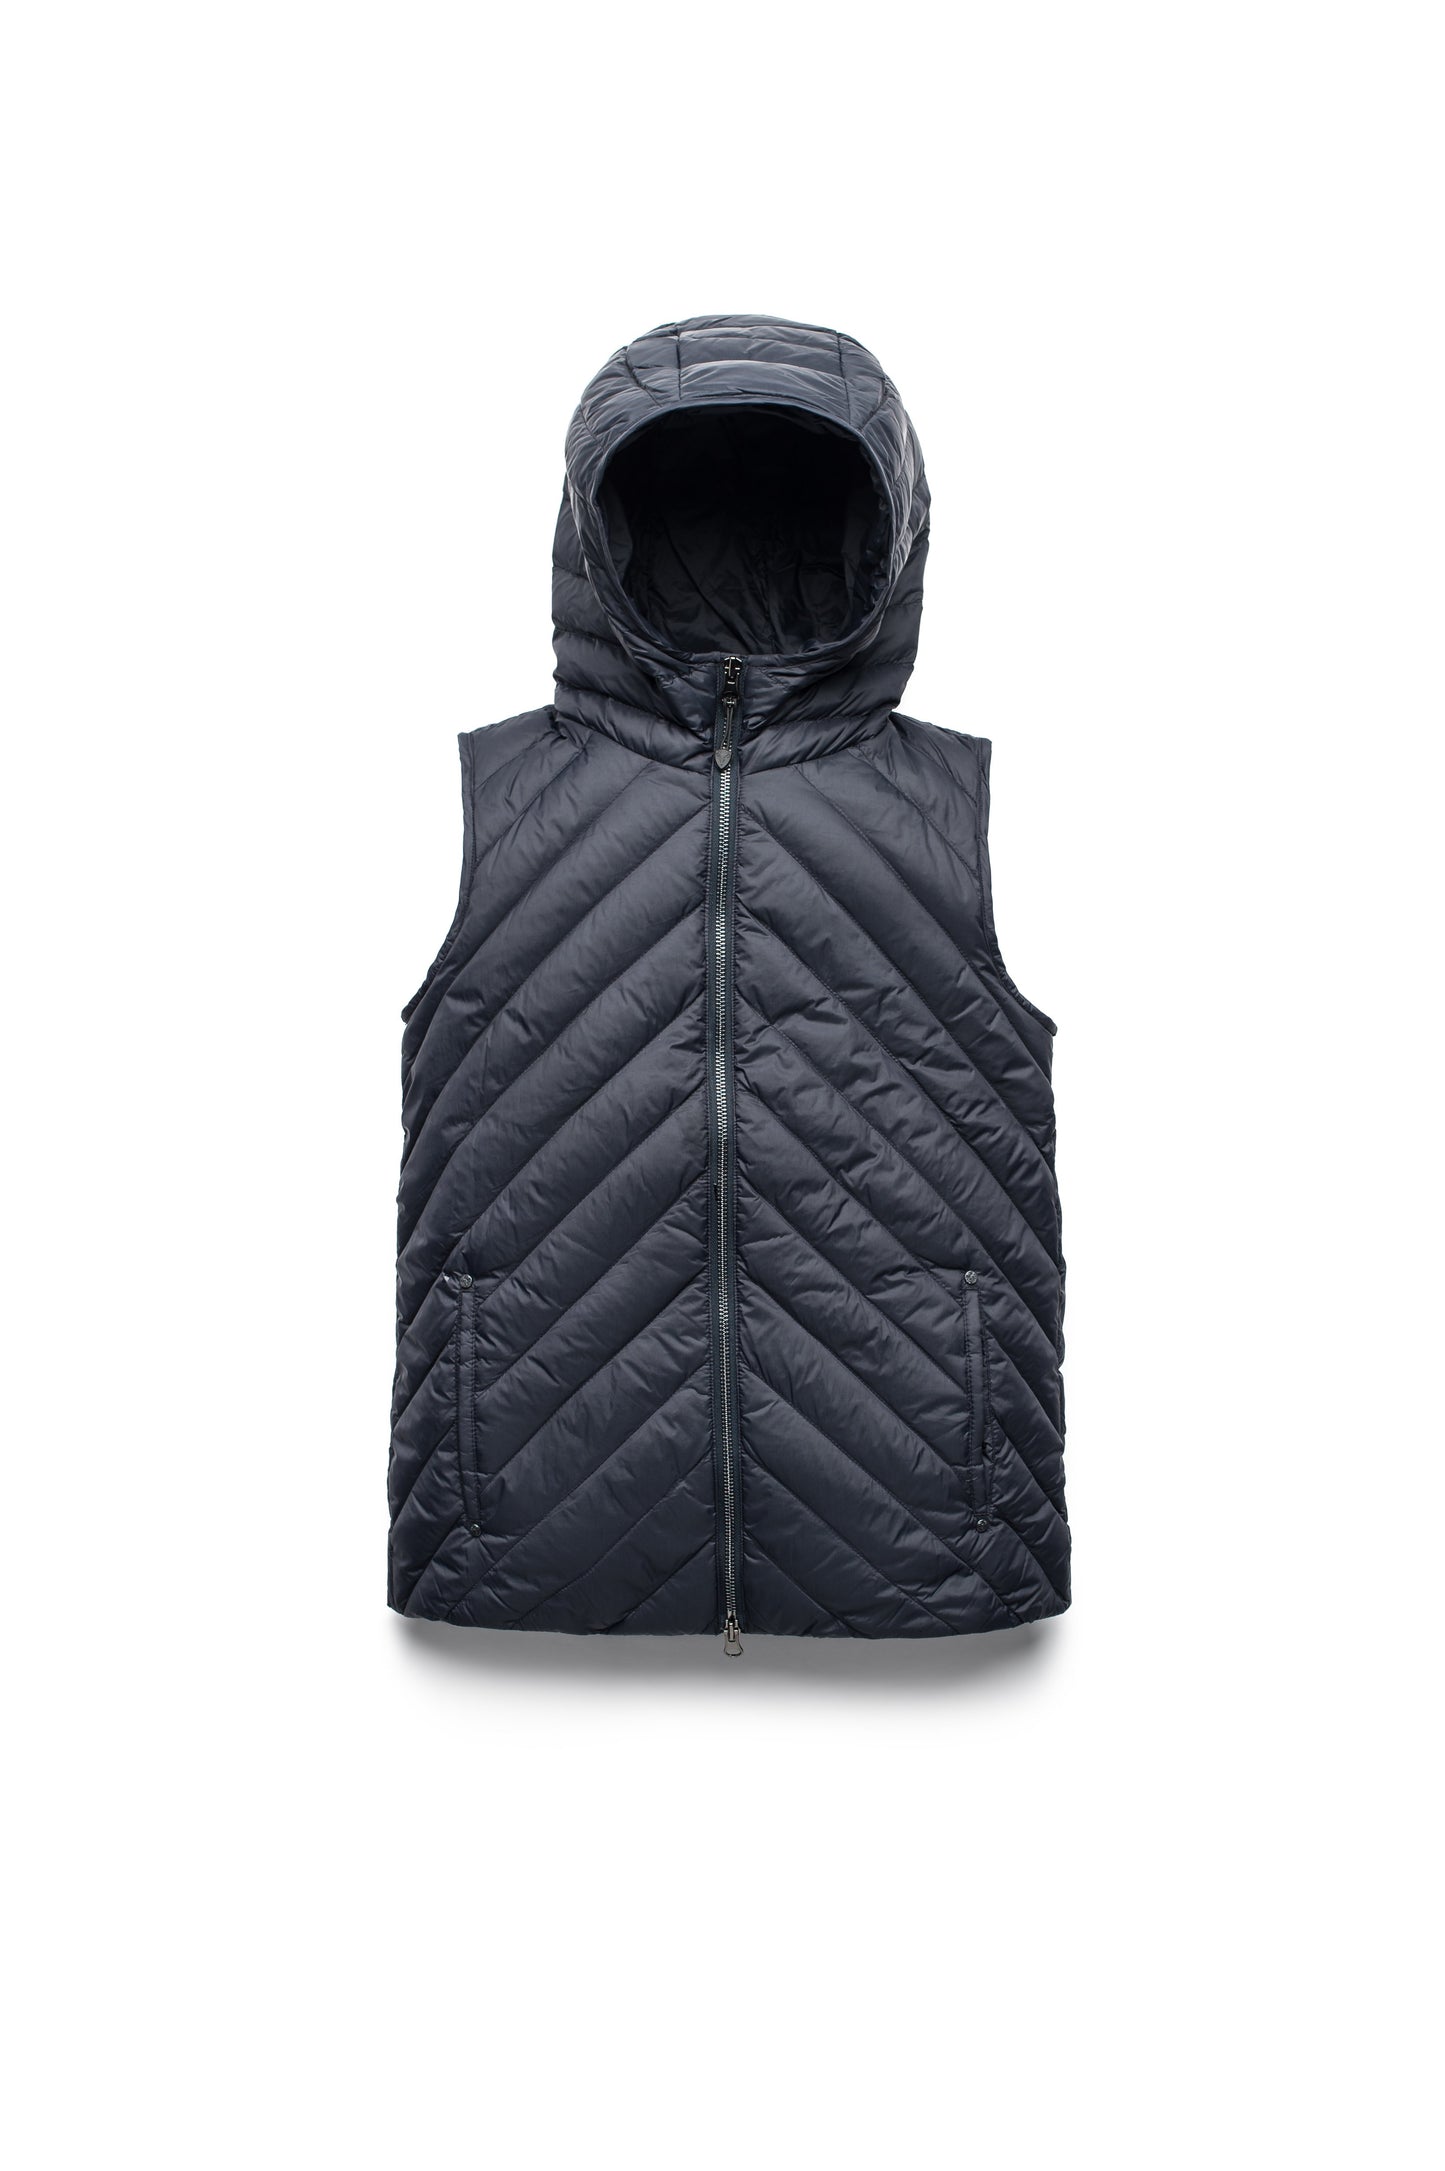 Women's down filled vest with diagonal quilting pattern throughout in Navy